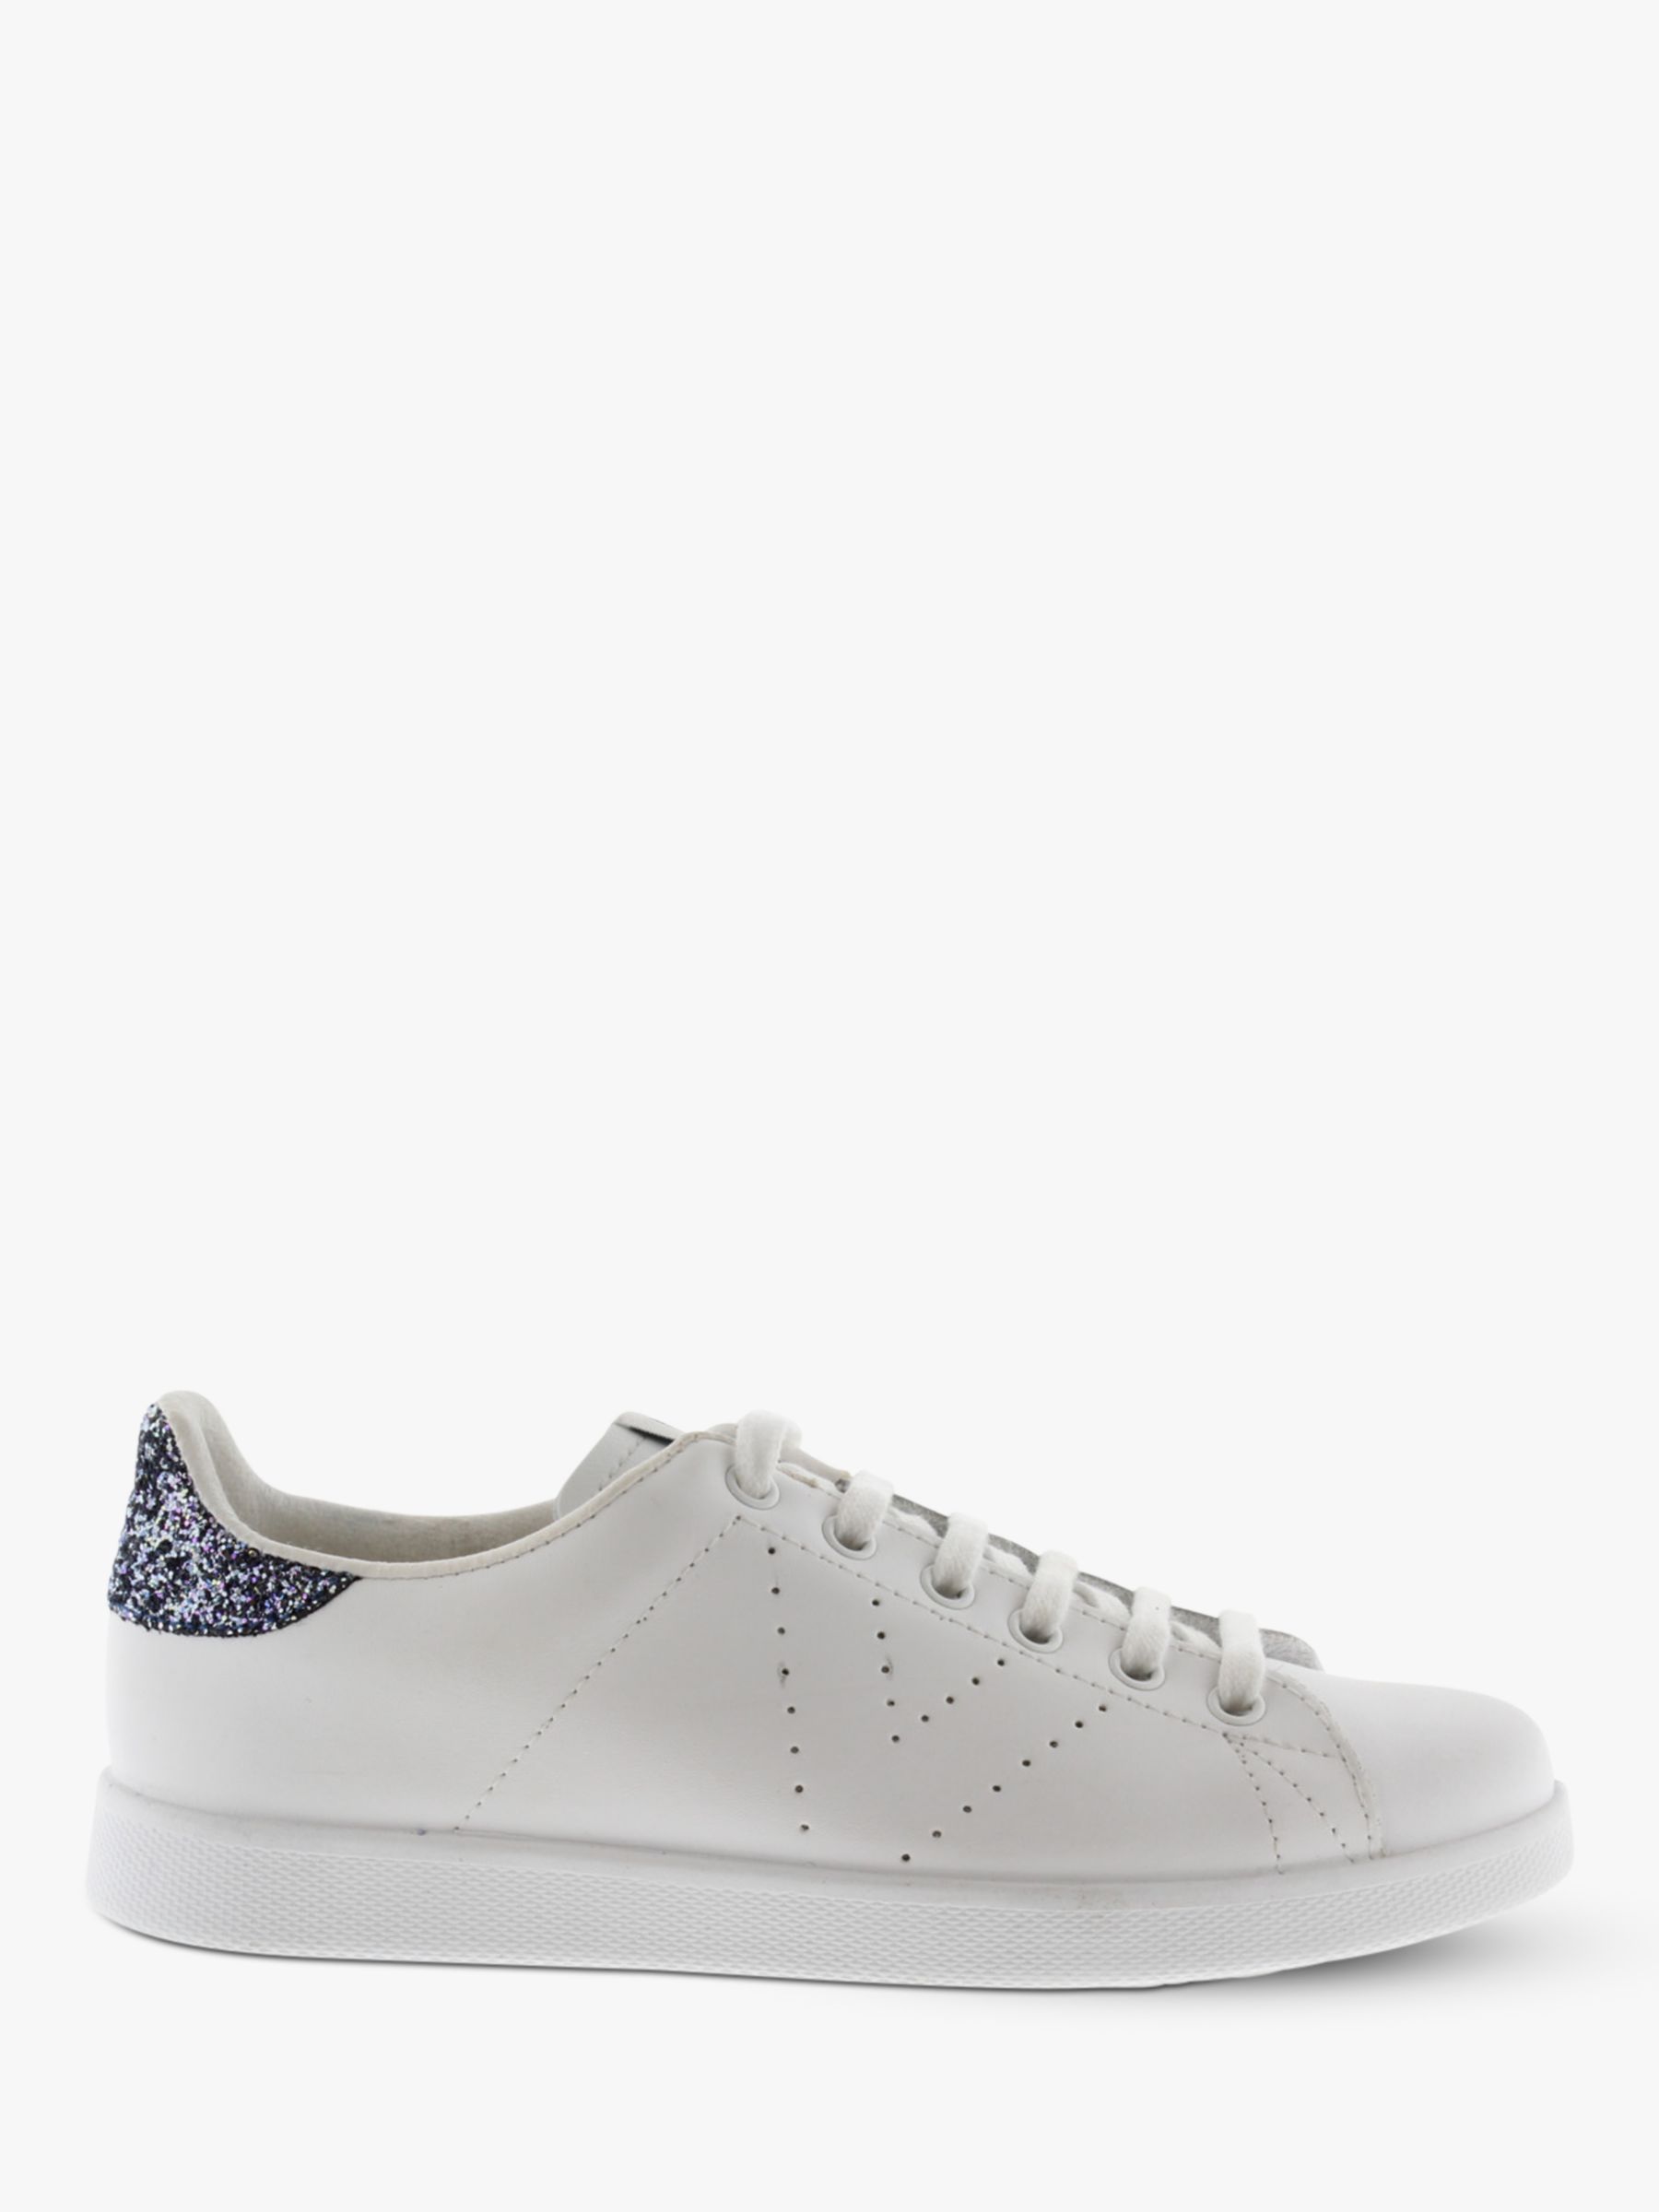 Victoria Shoes Tenis Leather Trainers, White at John Lewis & Partners